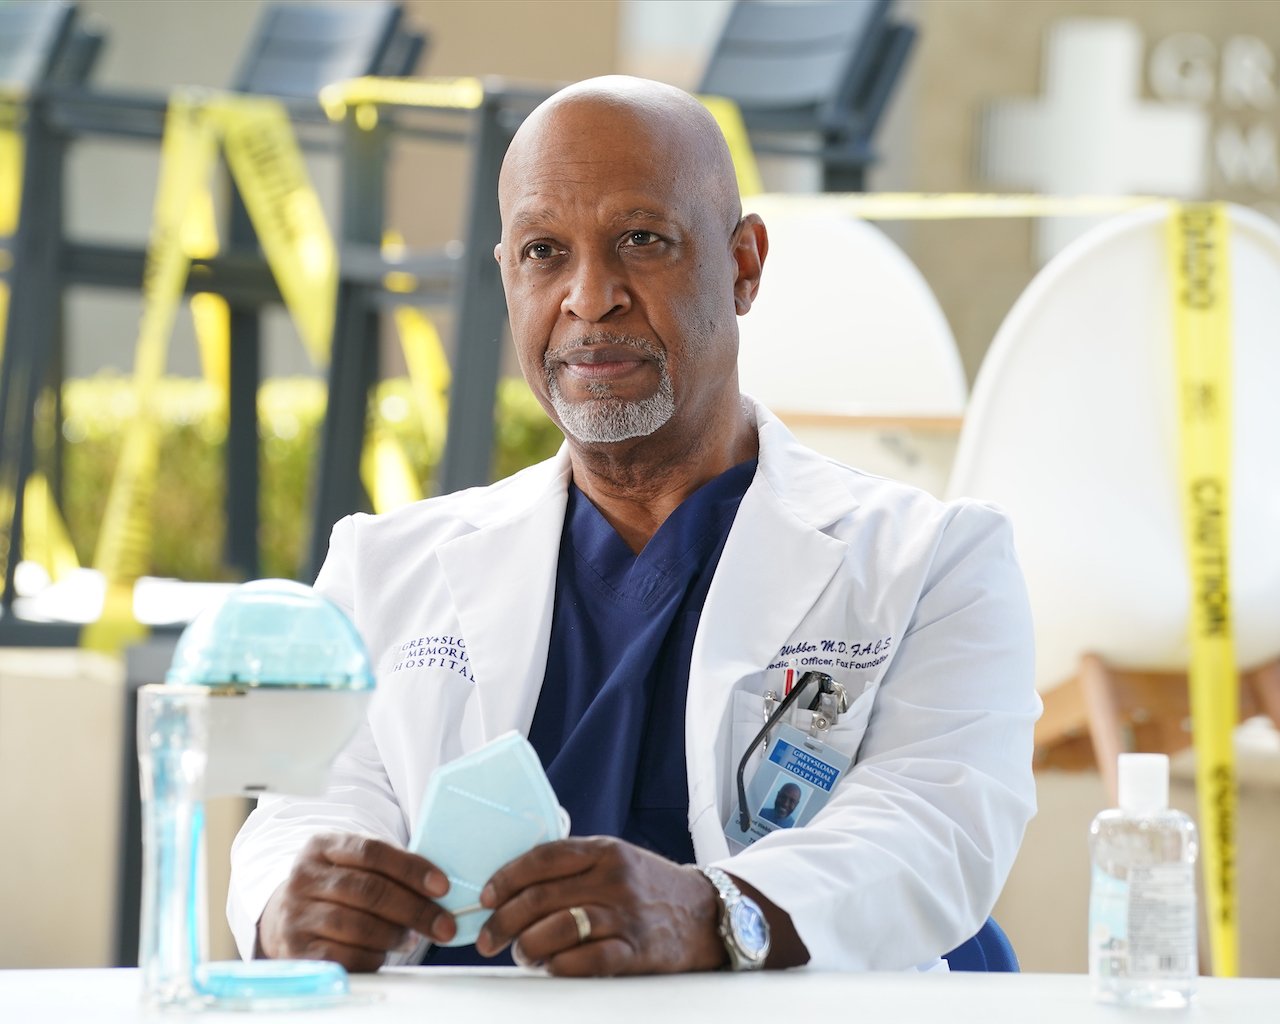 James Pickens Jr. as Dr. Richard Webber sits down wearing a doctor's coat in 'Grey's Anatomy'